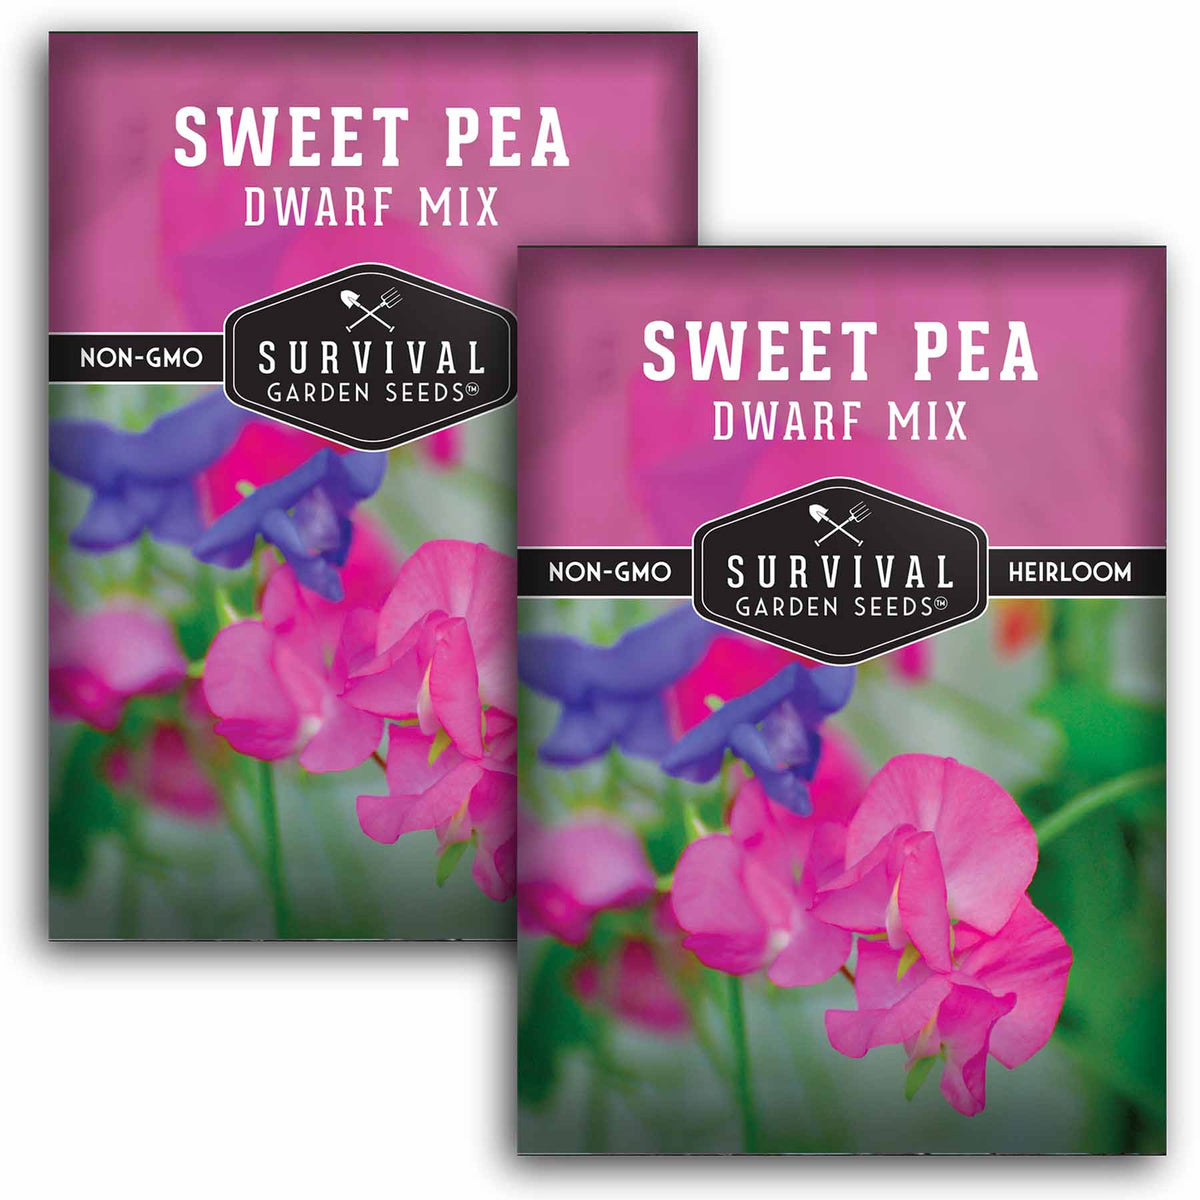 2 packets of Sweet Pea seeds